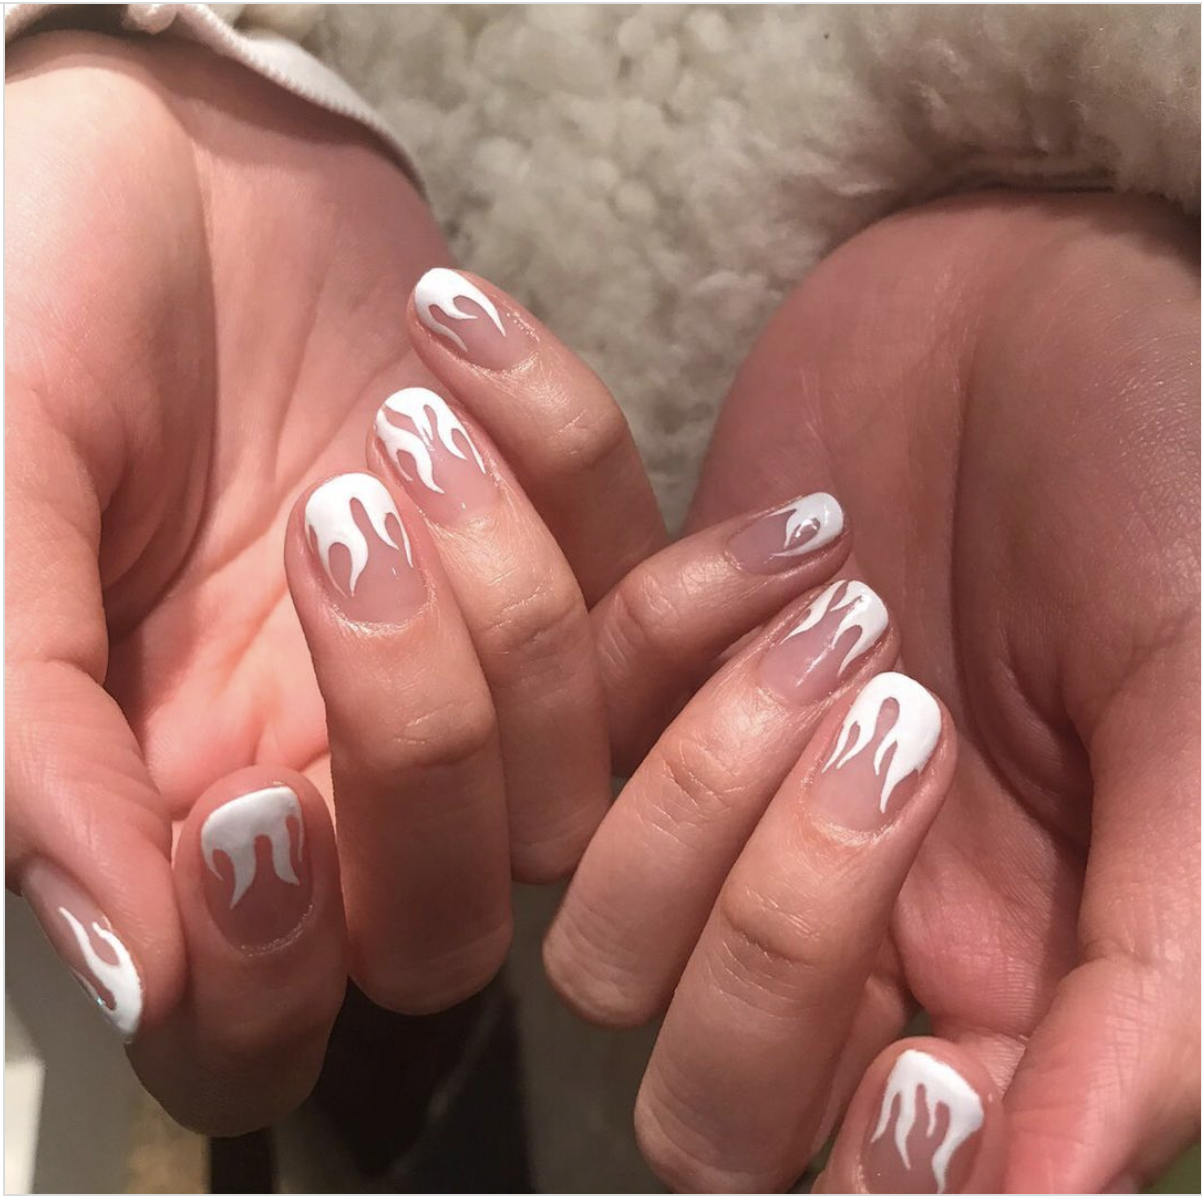 Amazon.com: Glossy Milk White Press on Nails Short Round False Nails Daily  Fake Nails Manicure DIY Nail Art Tips for Women Girls Finger Wearable :  Beauty & Personal Care